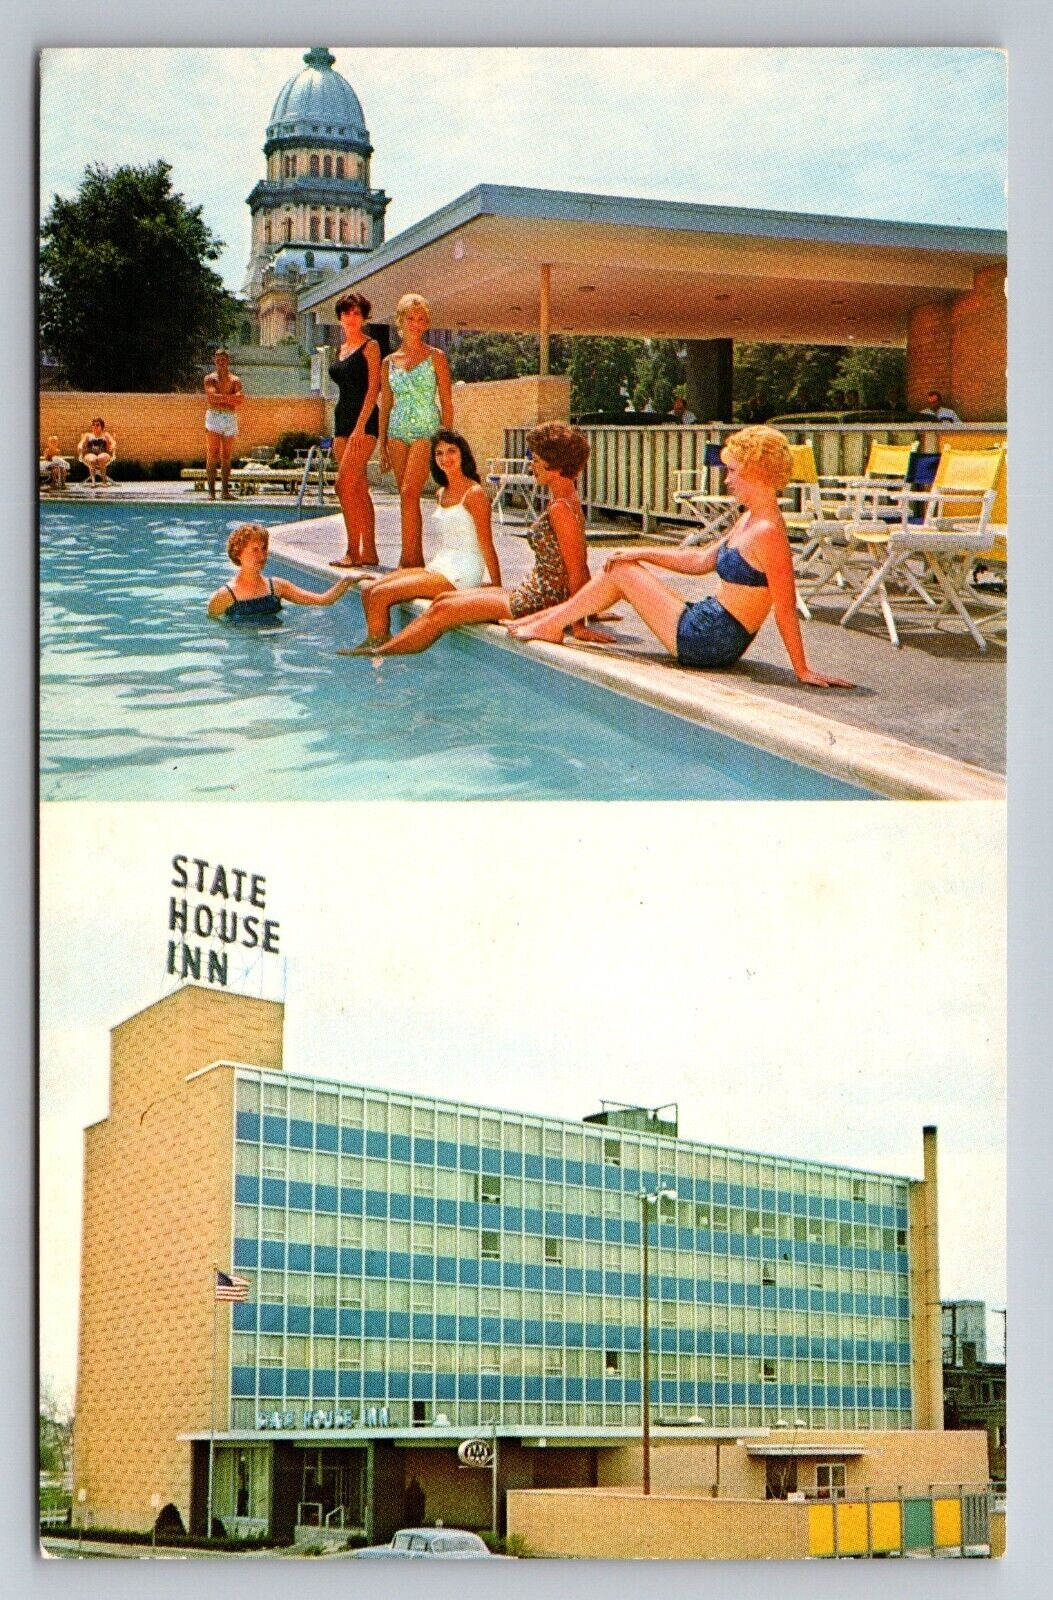 State House Inn,Poolside View, Springfield,Illinois,VTG Unposted C.1968 Postcard